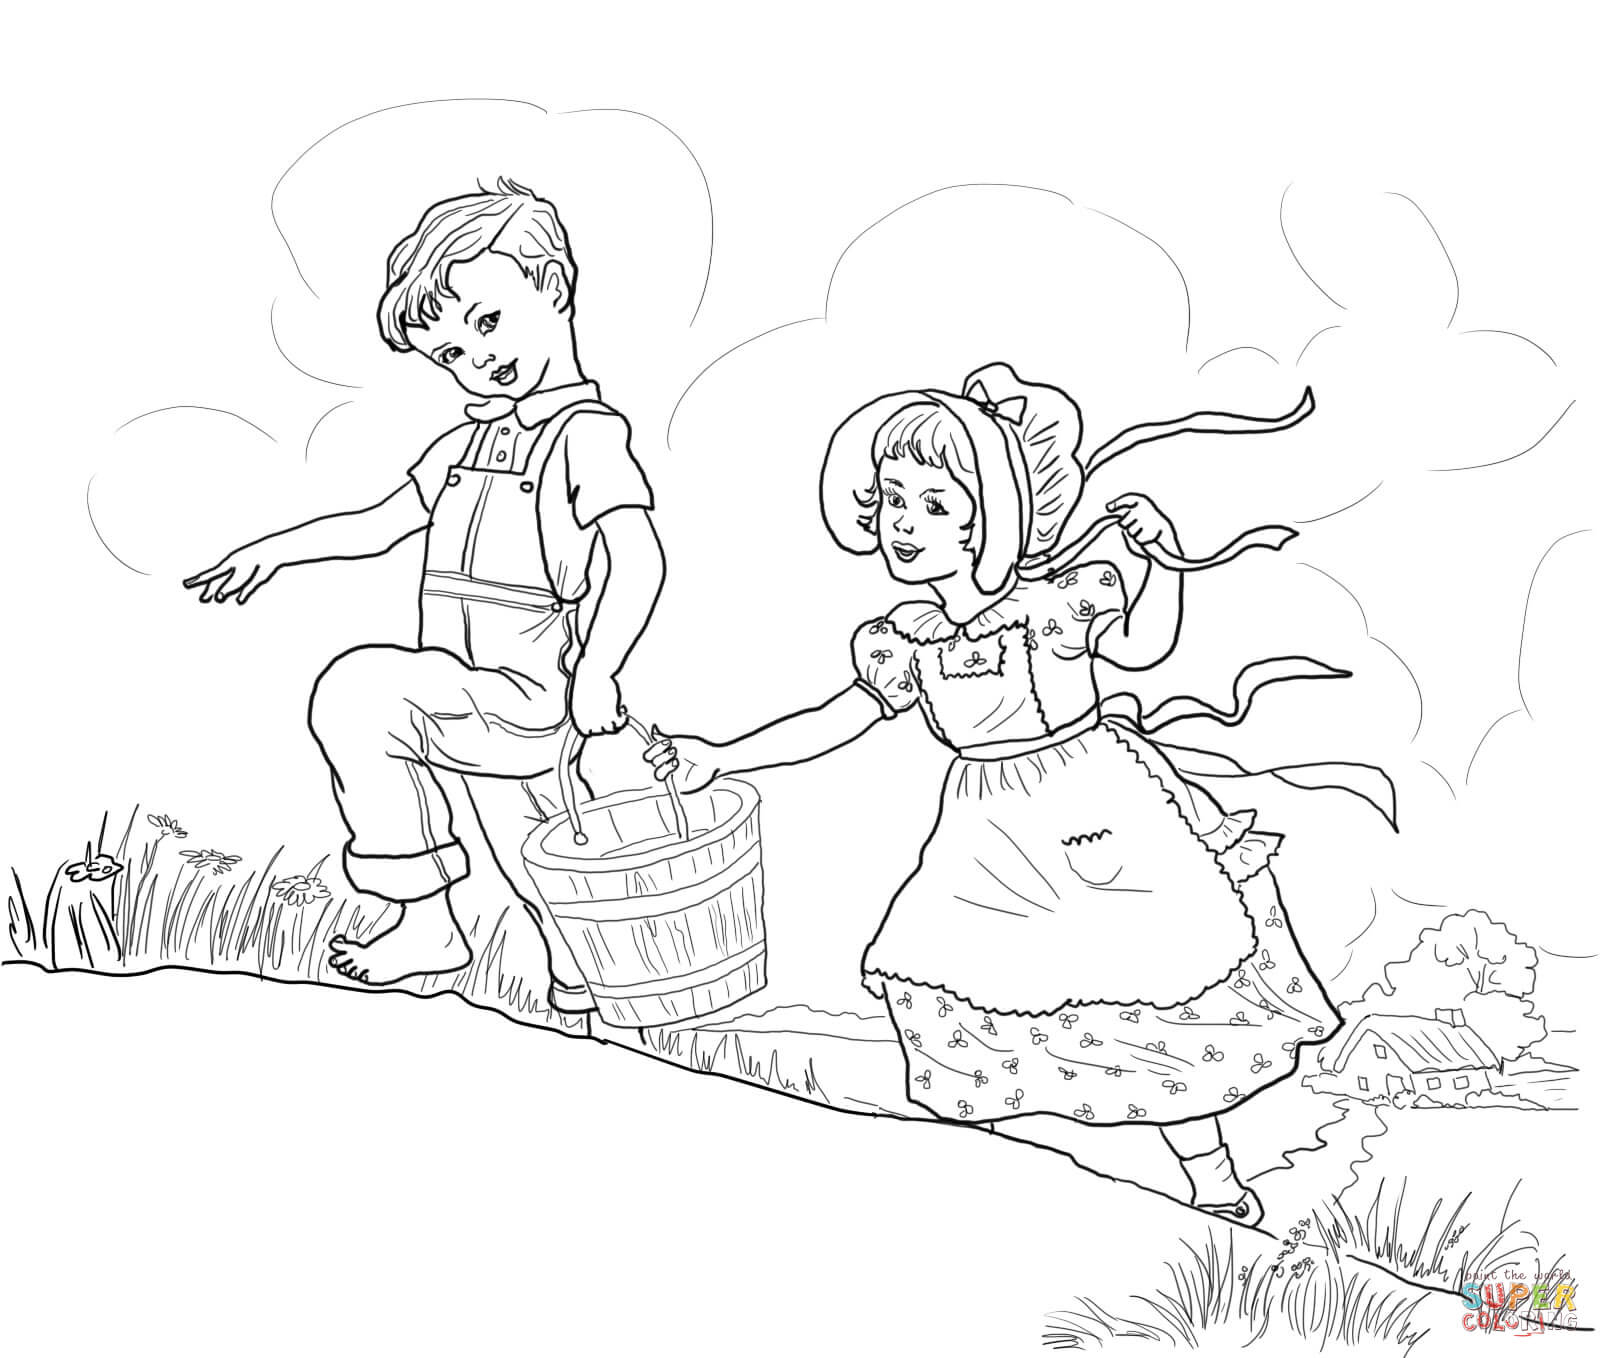 Jack And Jill Nursery Rhyme Coloring Page | Free Printable Coloring - Free Printable Nursery Rhyme Coloring Pages